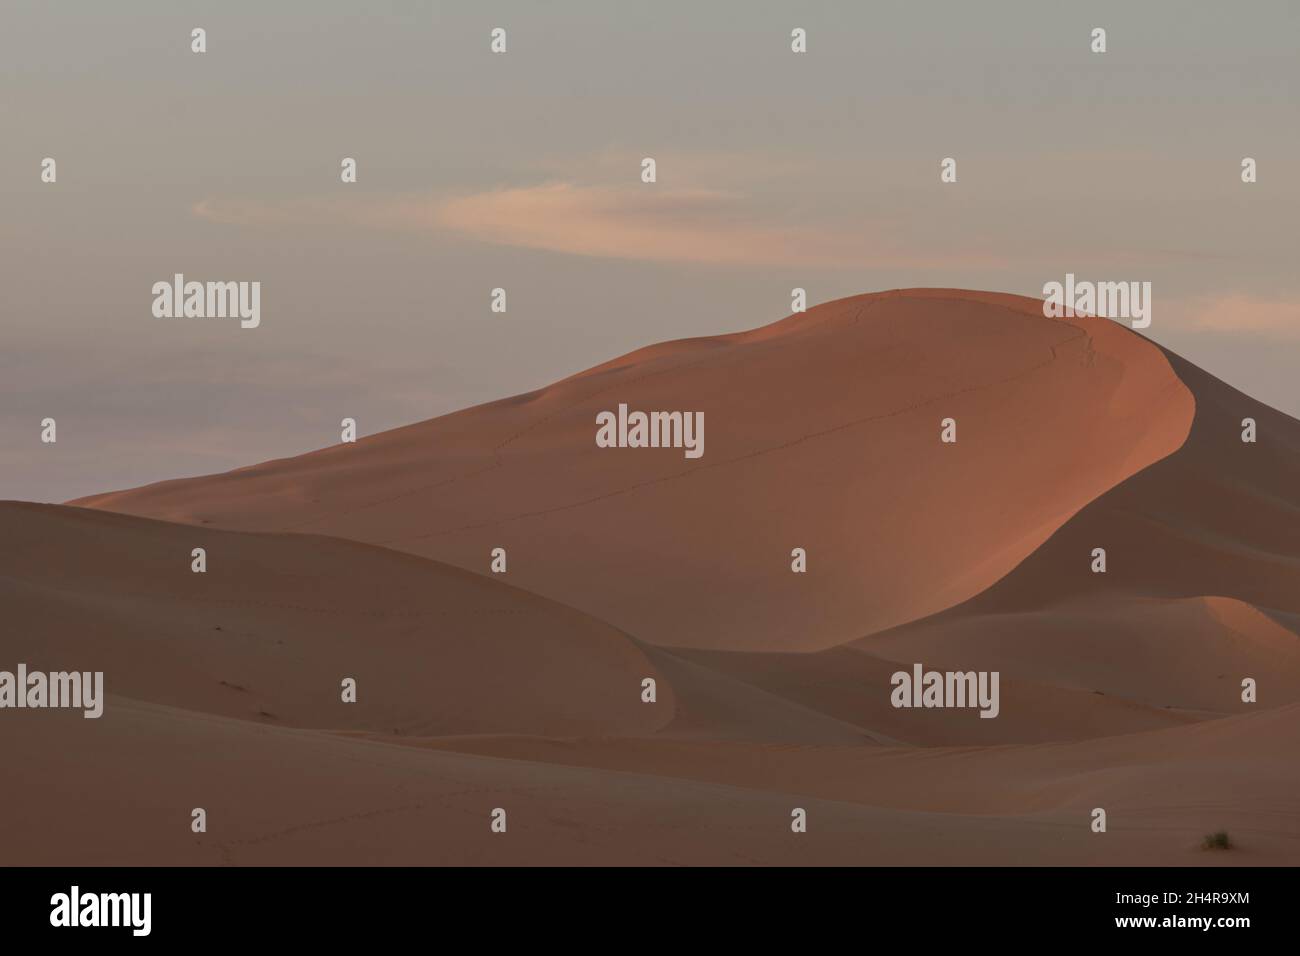 Mesmerizing view of the high dunes in the Sahara desert of Taghit Stock Photo